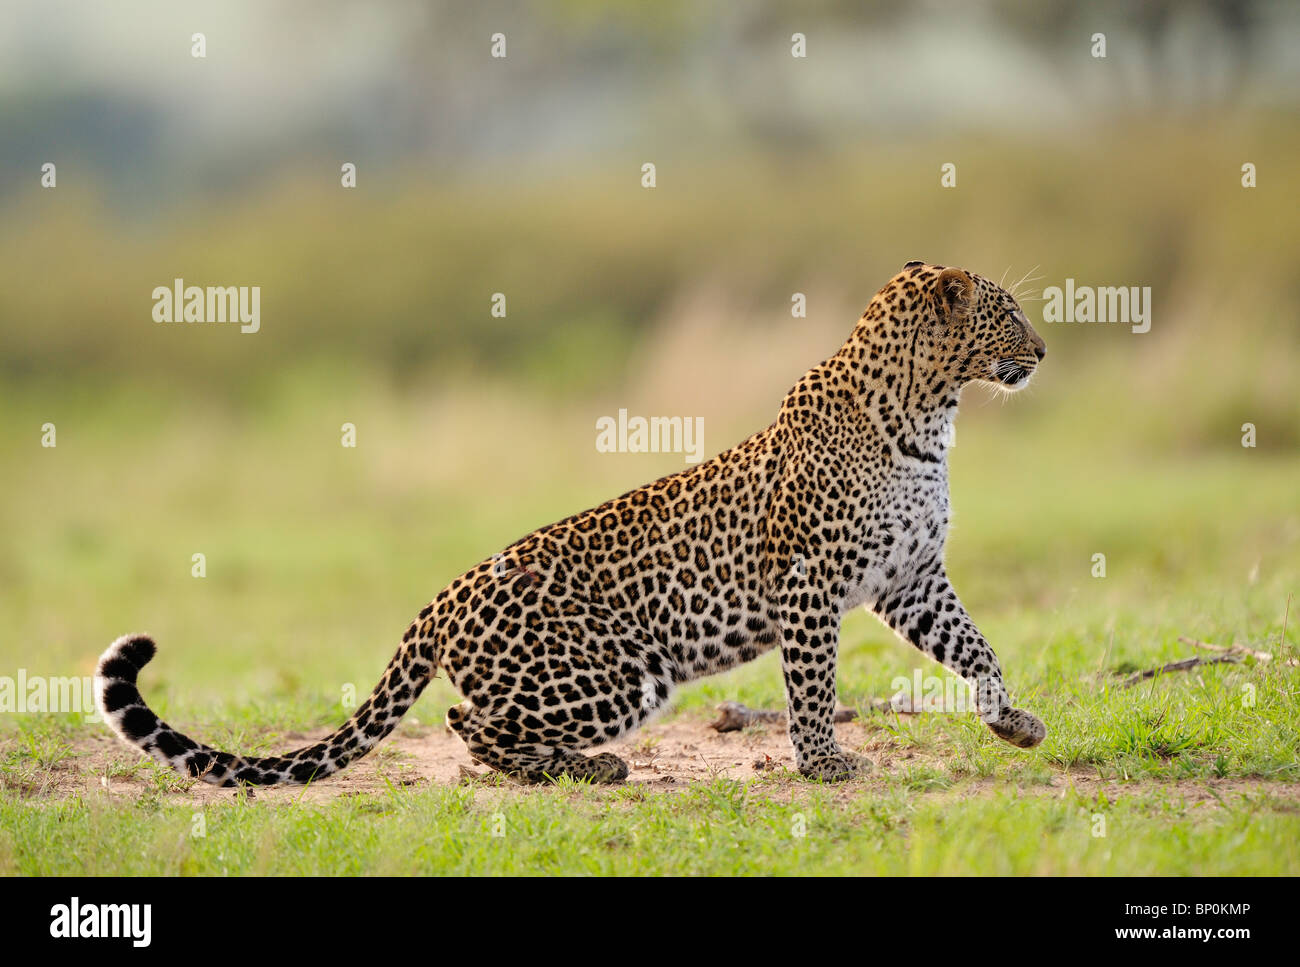 Leopard (Pathera pardus) is a stealthy big cat that ambushes prey from a close distance. Here, its staking prey in Masai Mara. Stock Photo